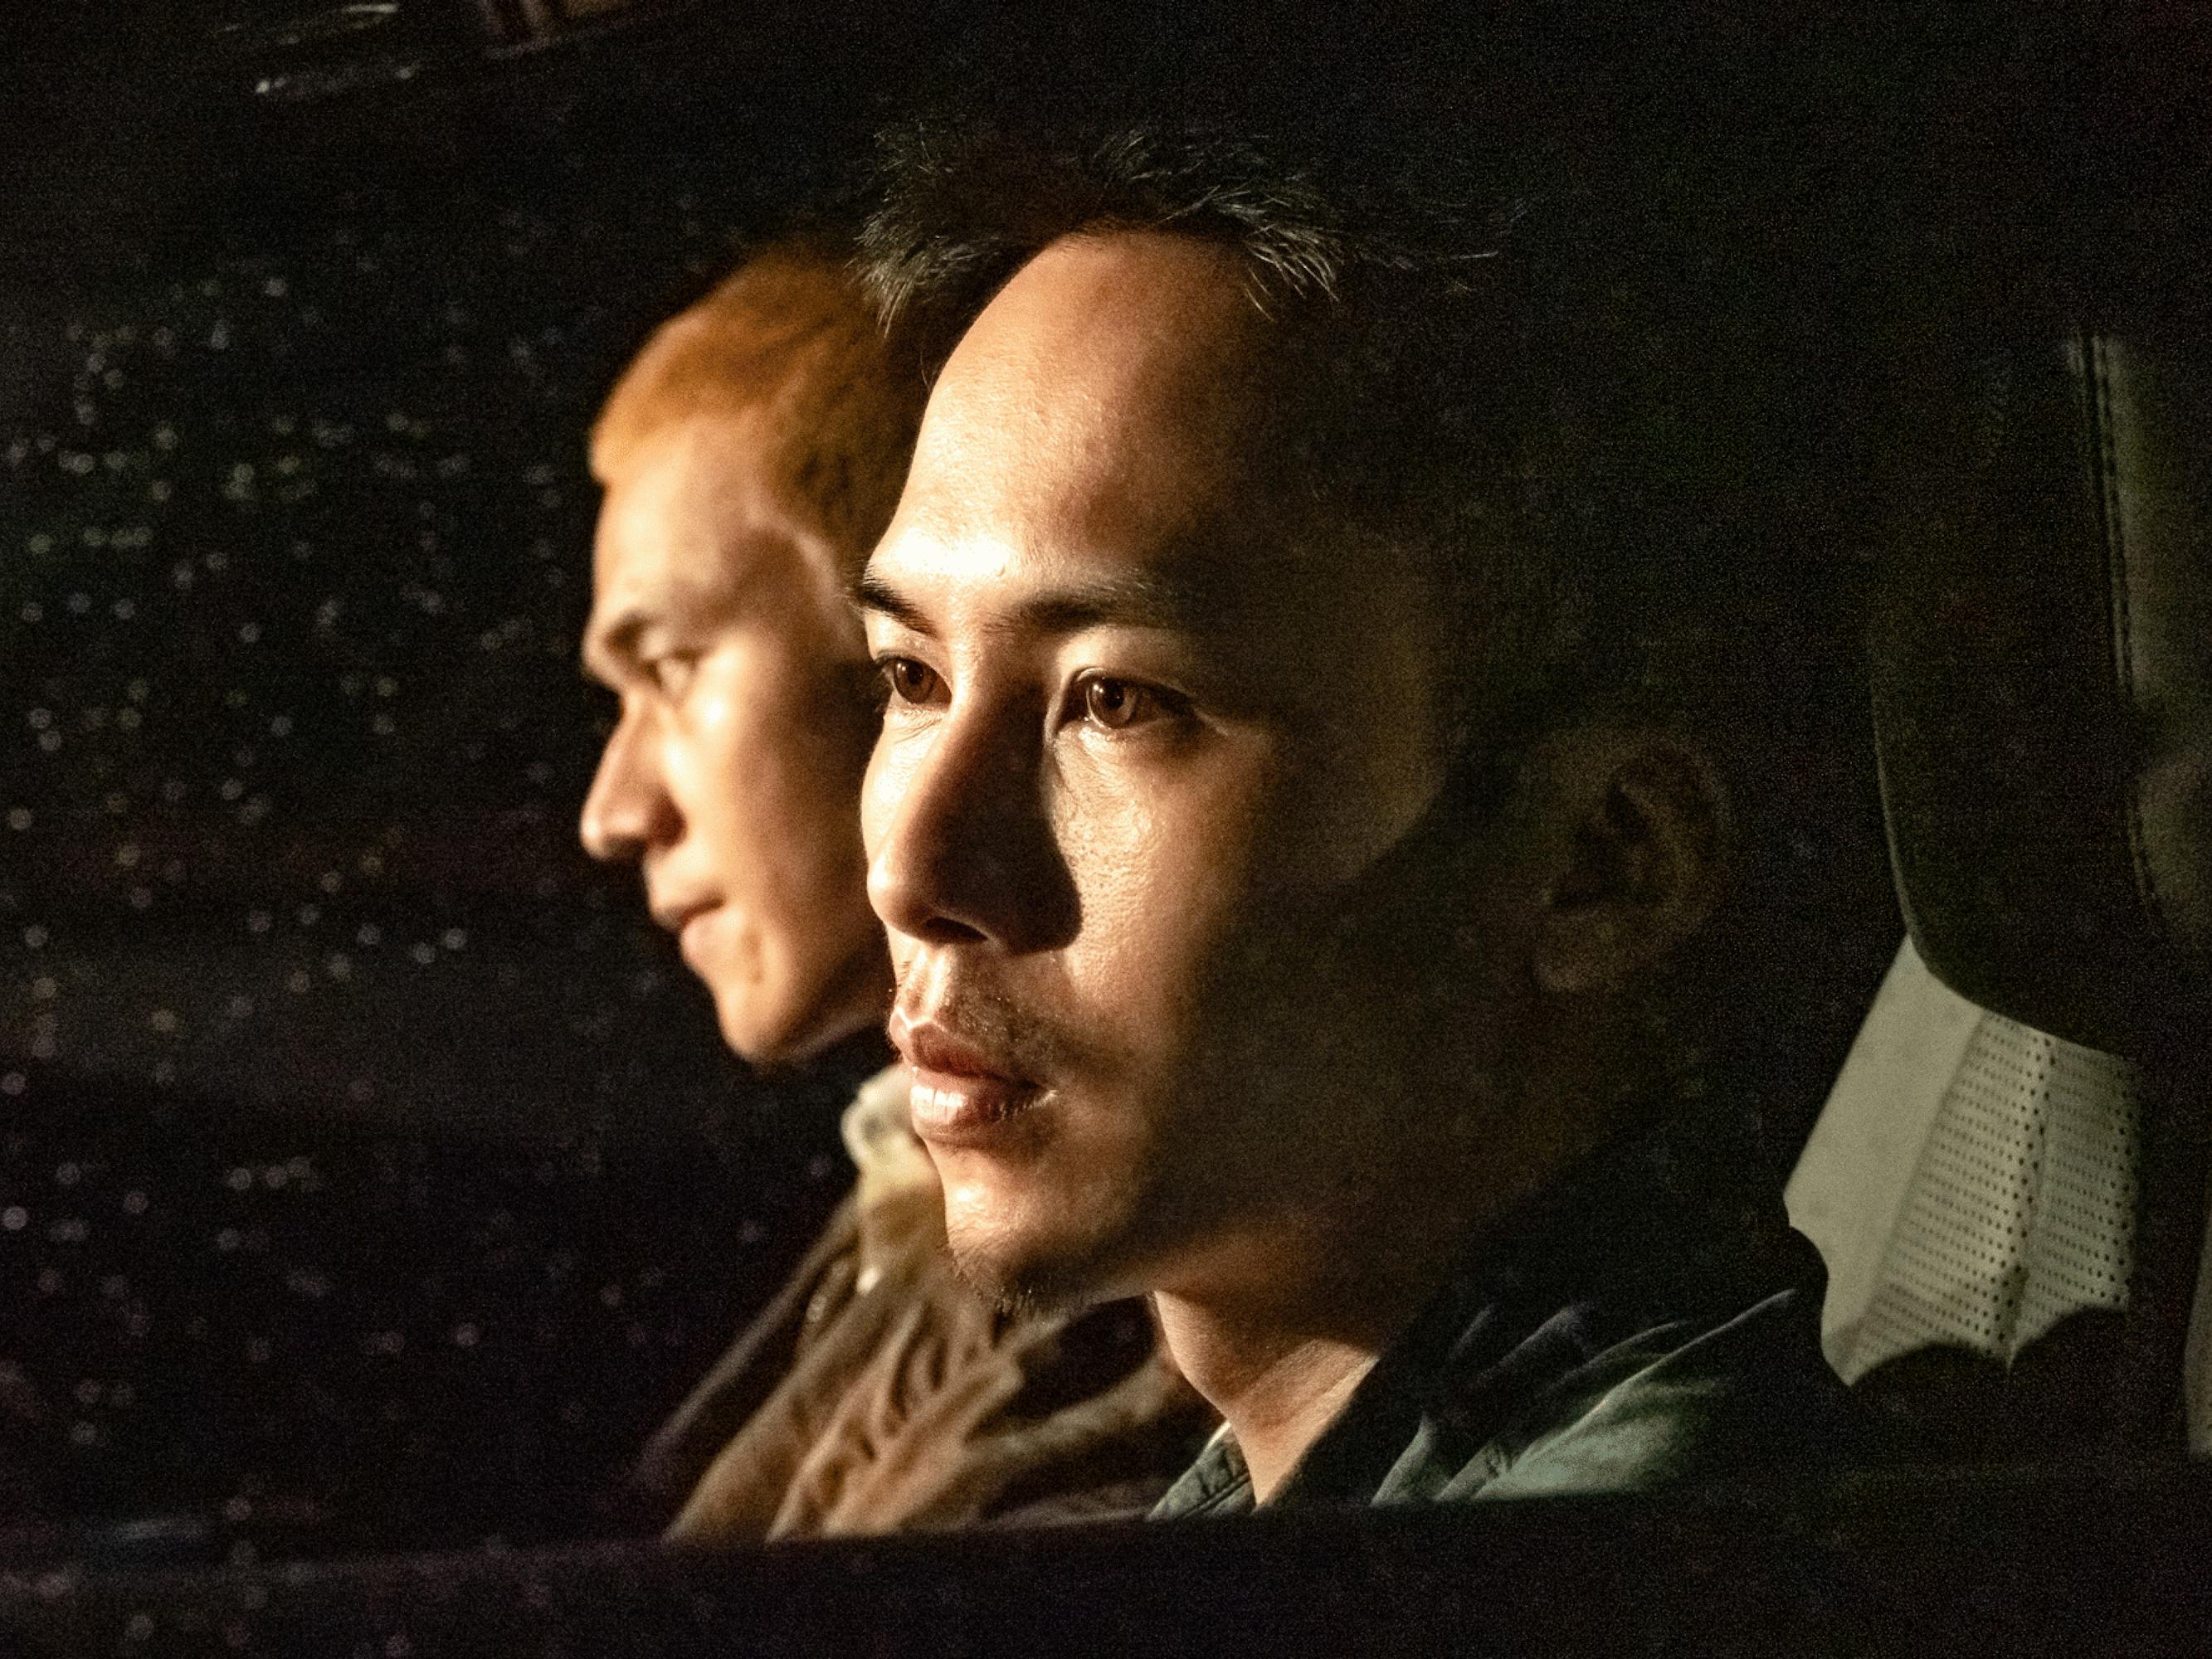 Radish and A-ho sit in a dark car in this still from the film. Their faces are illuminated, and the two young men look in different directions. Radish’s bleached hair stands out in the darkness around him.